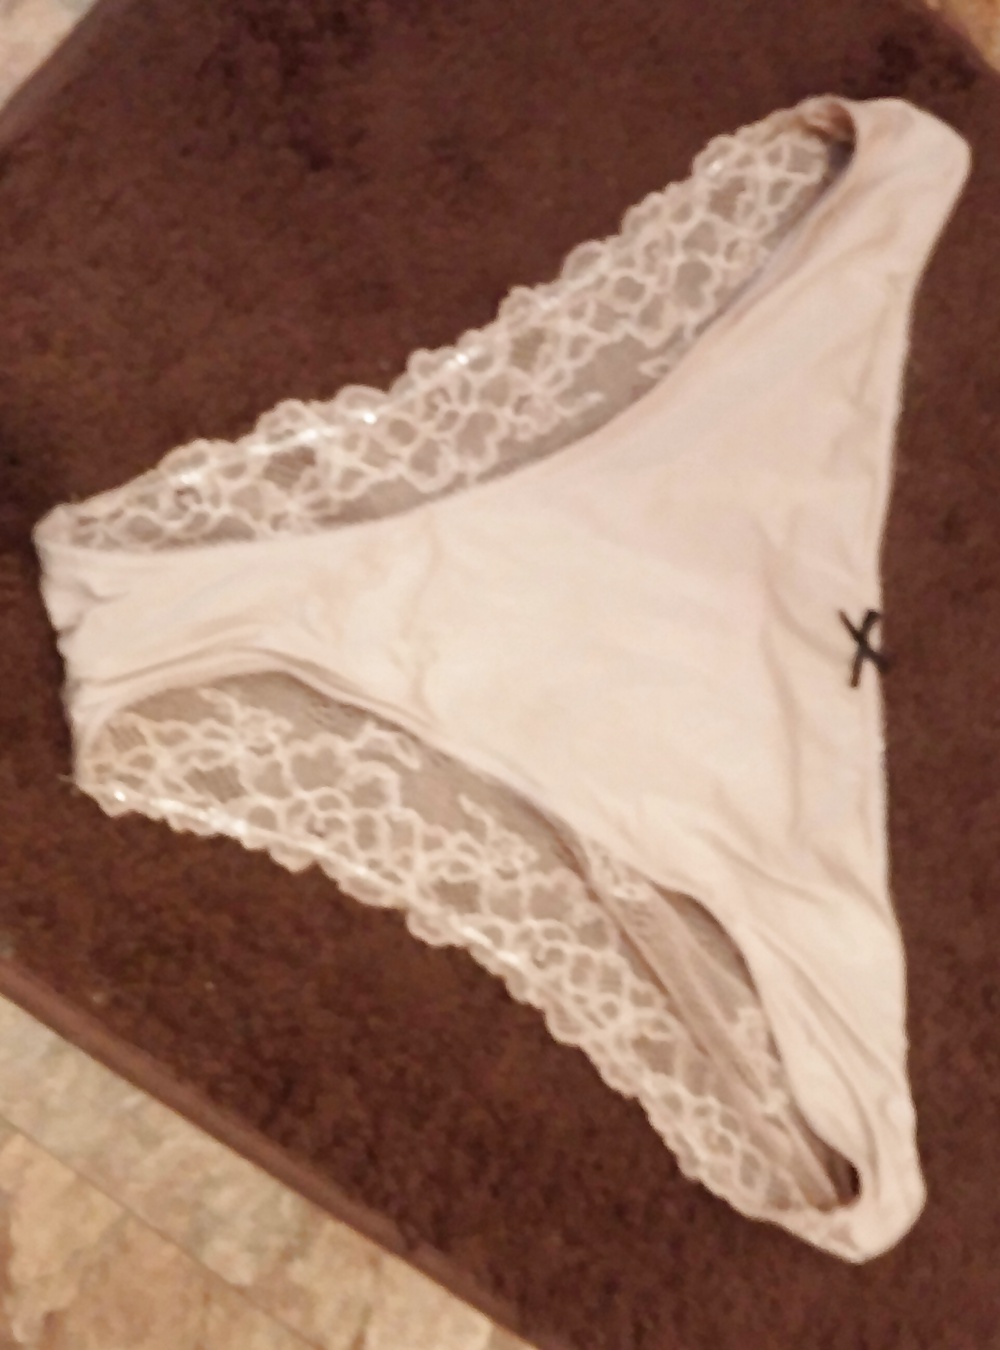 Another Pair of the Wifes Panties  #25326154